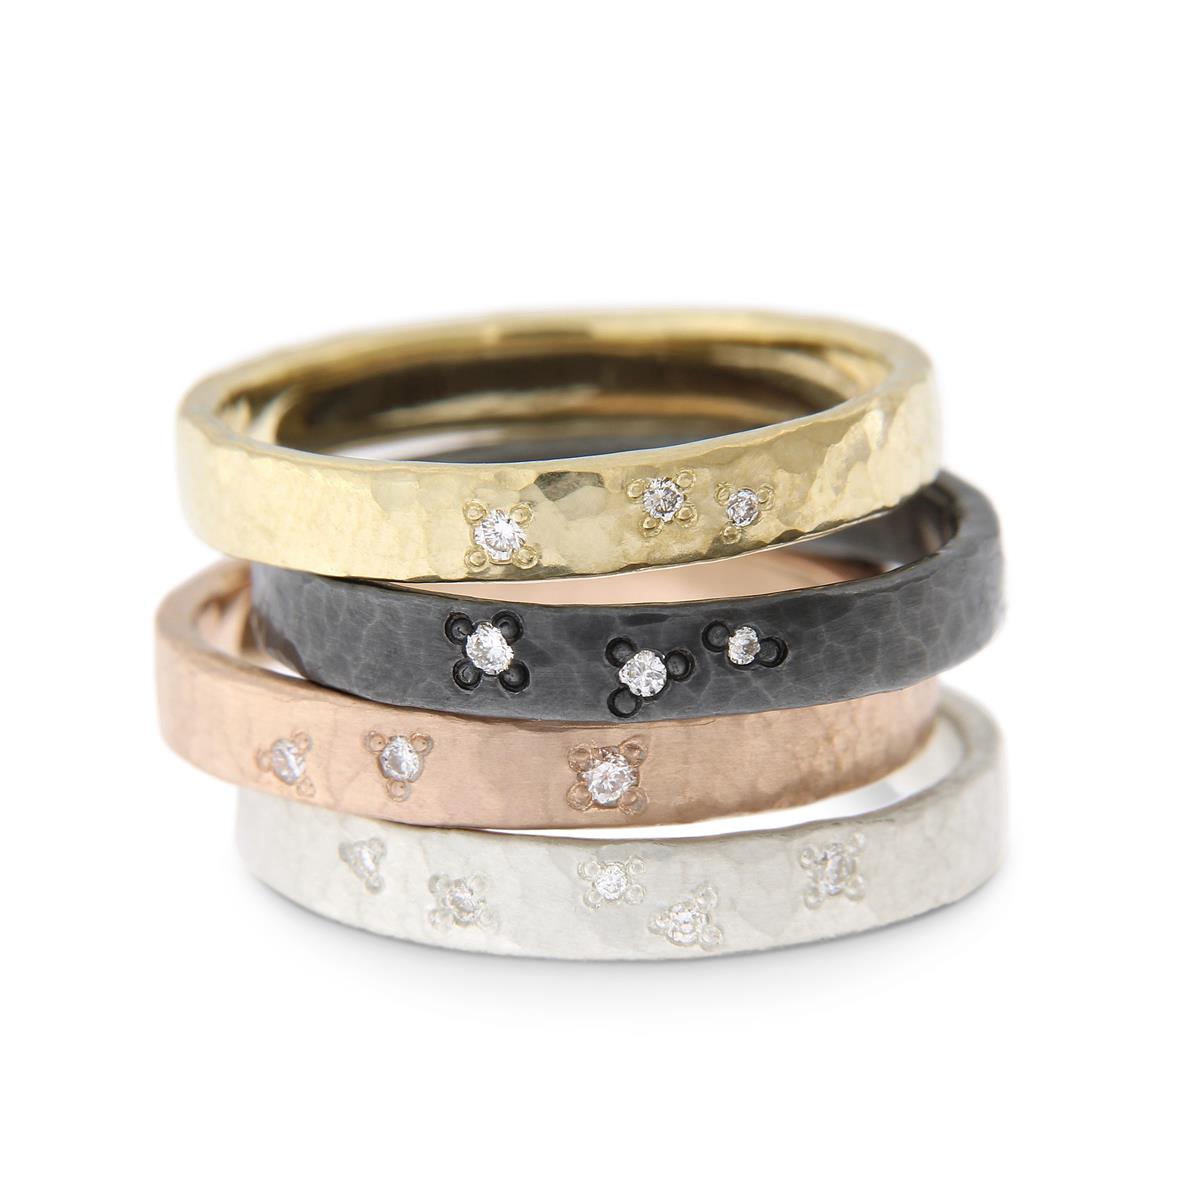 Katie g. Jewellery - Wide Hammered Rings with stargazing setting diamonds